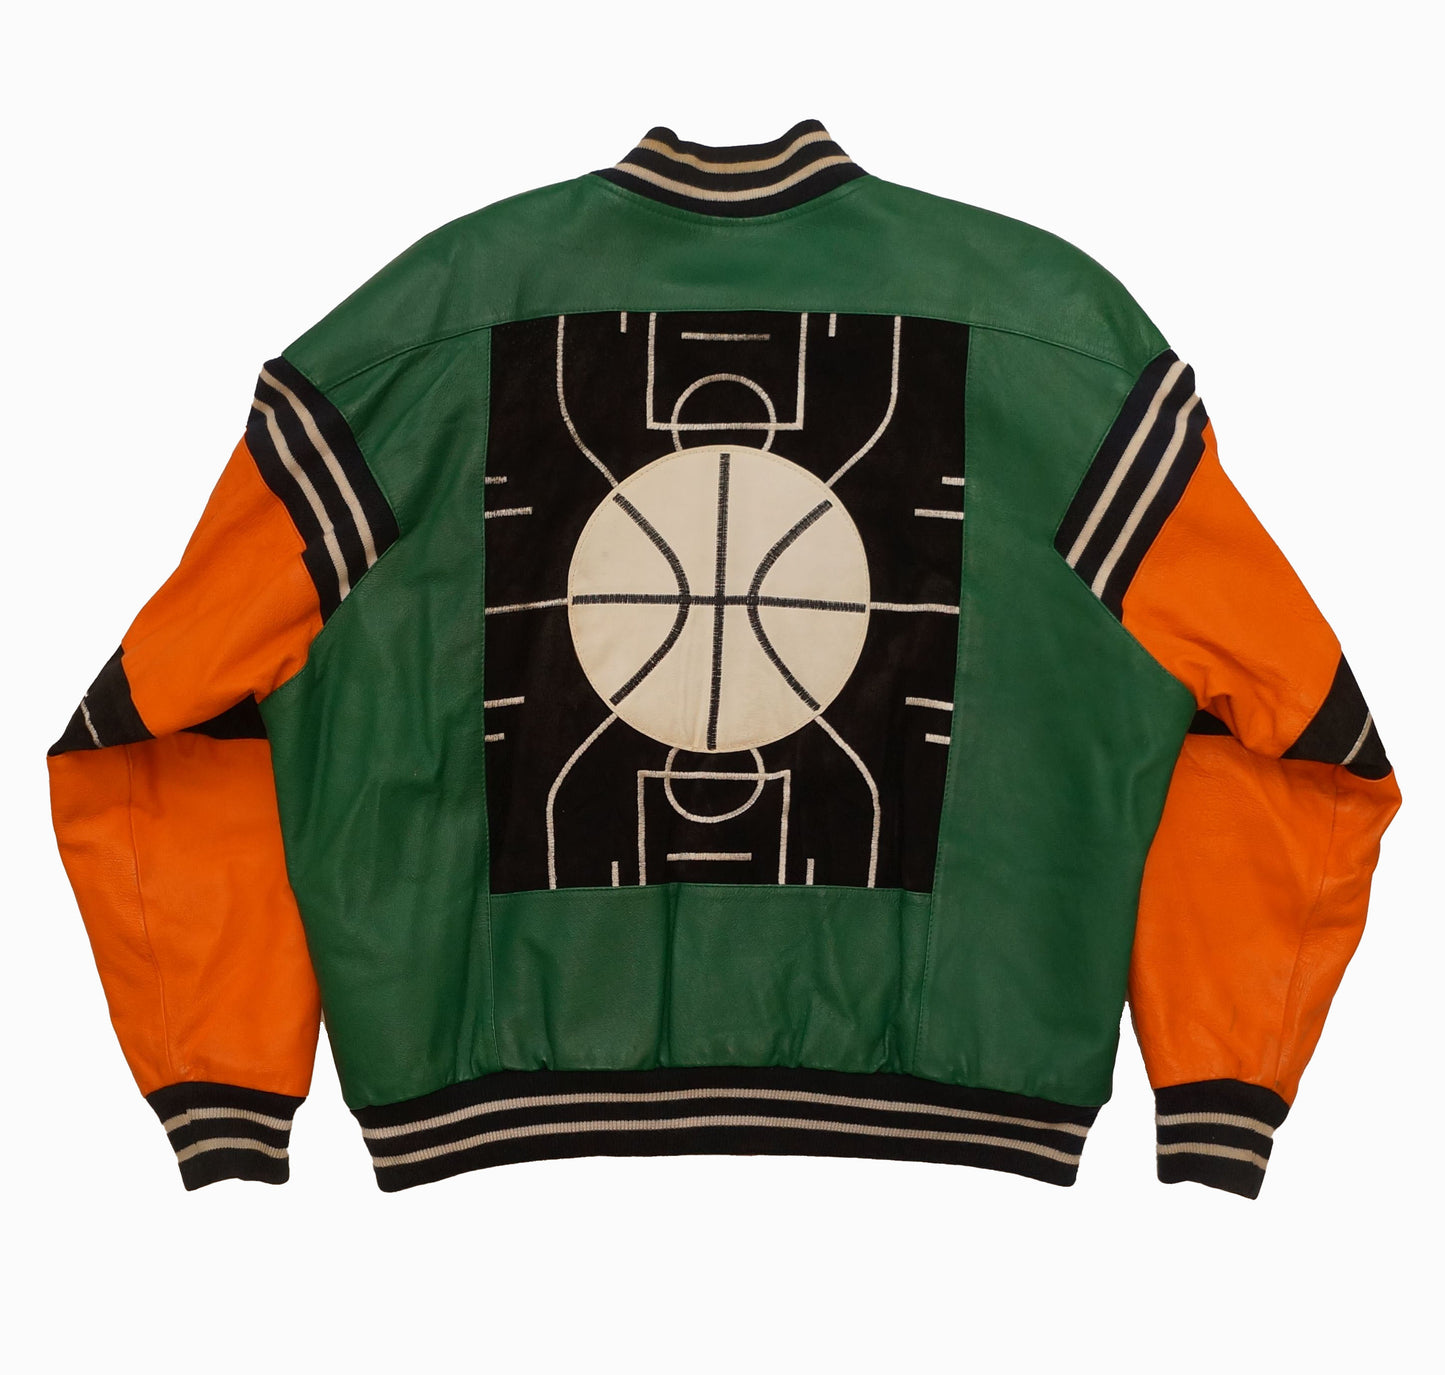 Vintage Orange, white and Green Leather "Basket Ball" Jacket By Michael Hoban